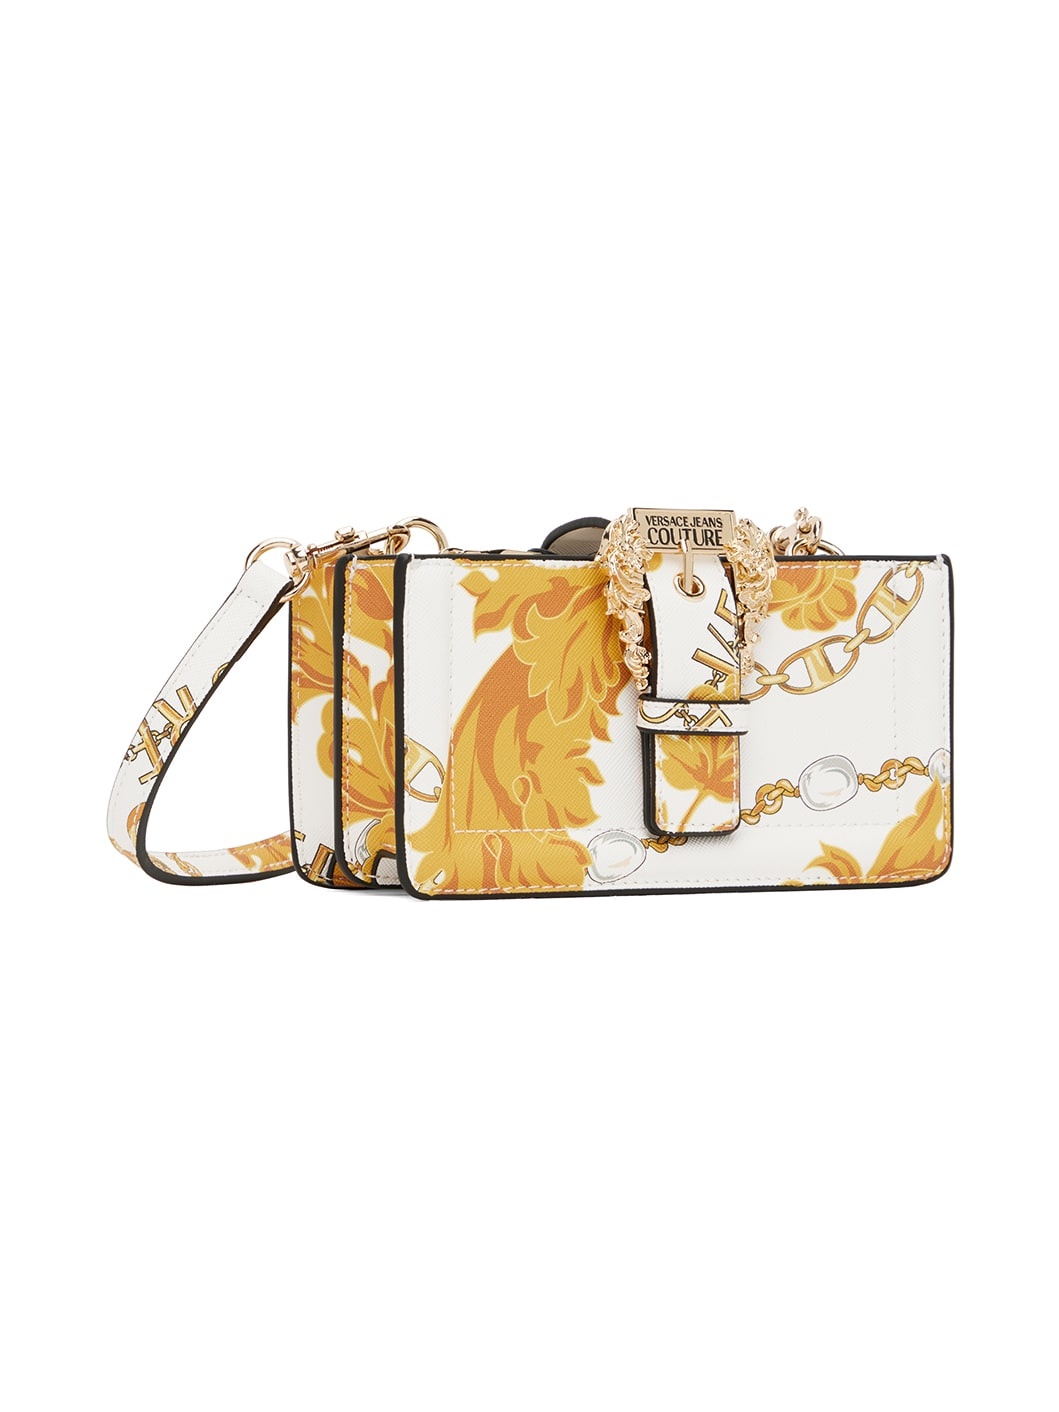 White & Gold Pin-Buckle Bag - 2